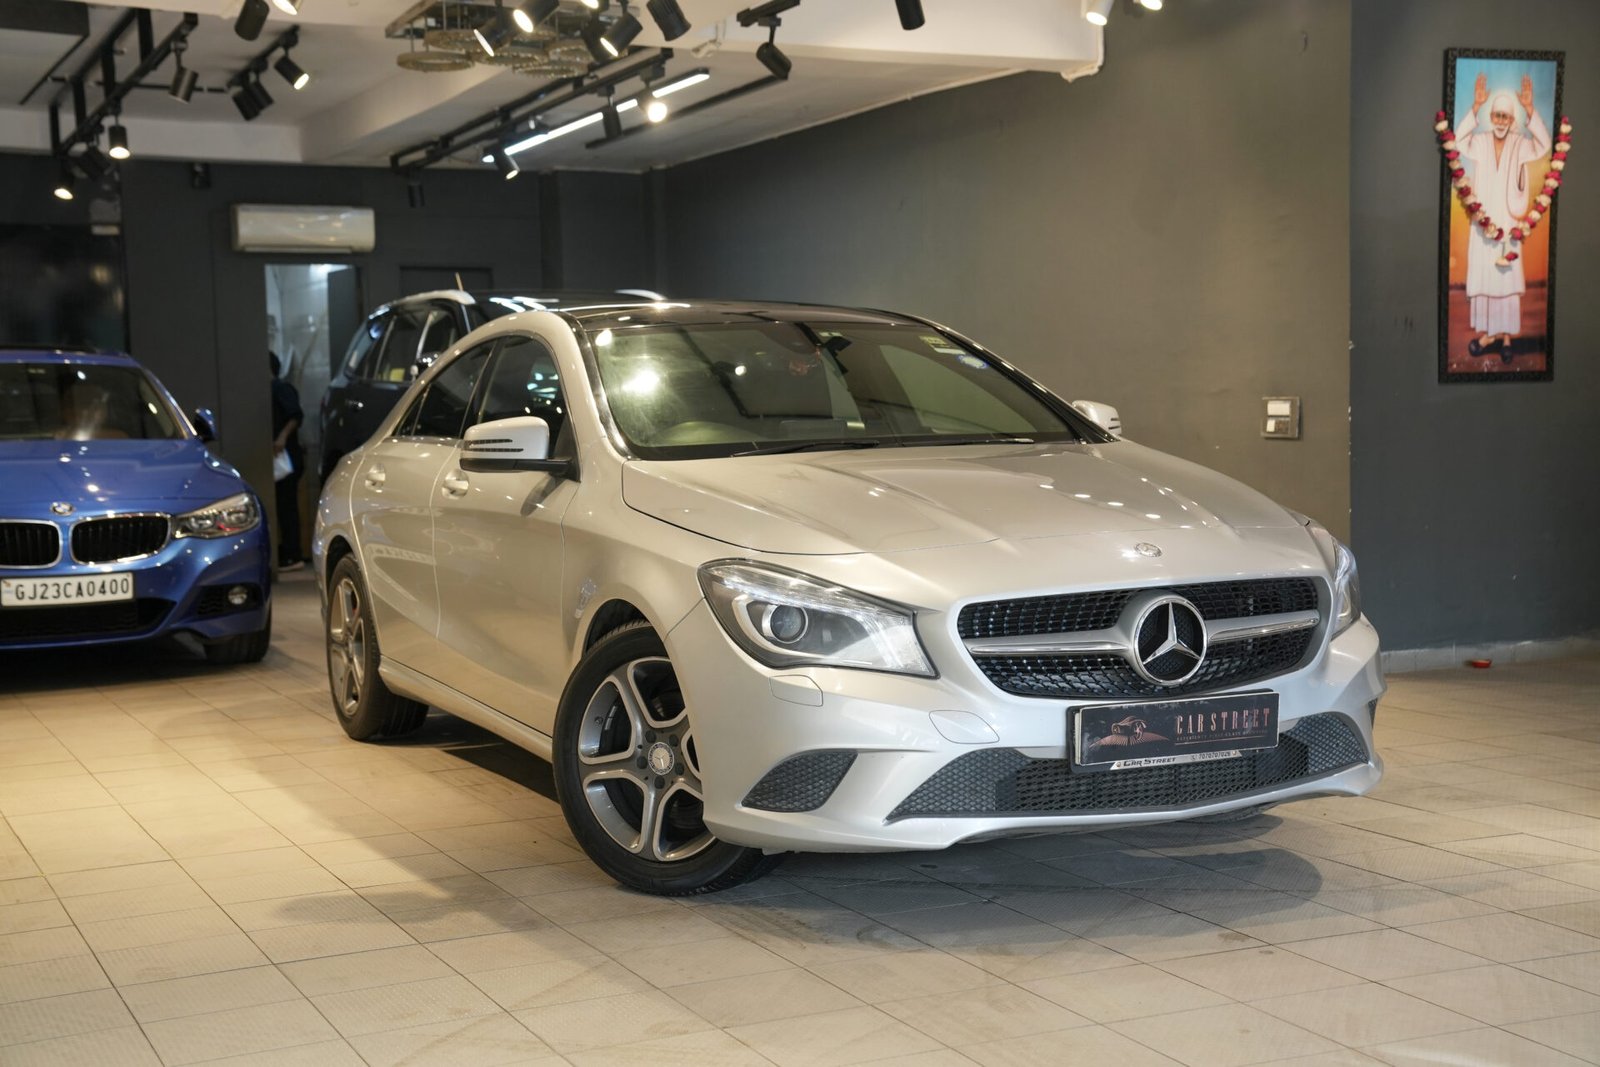 Pre-Owned Mercedes-Benz for Sale